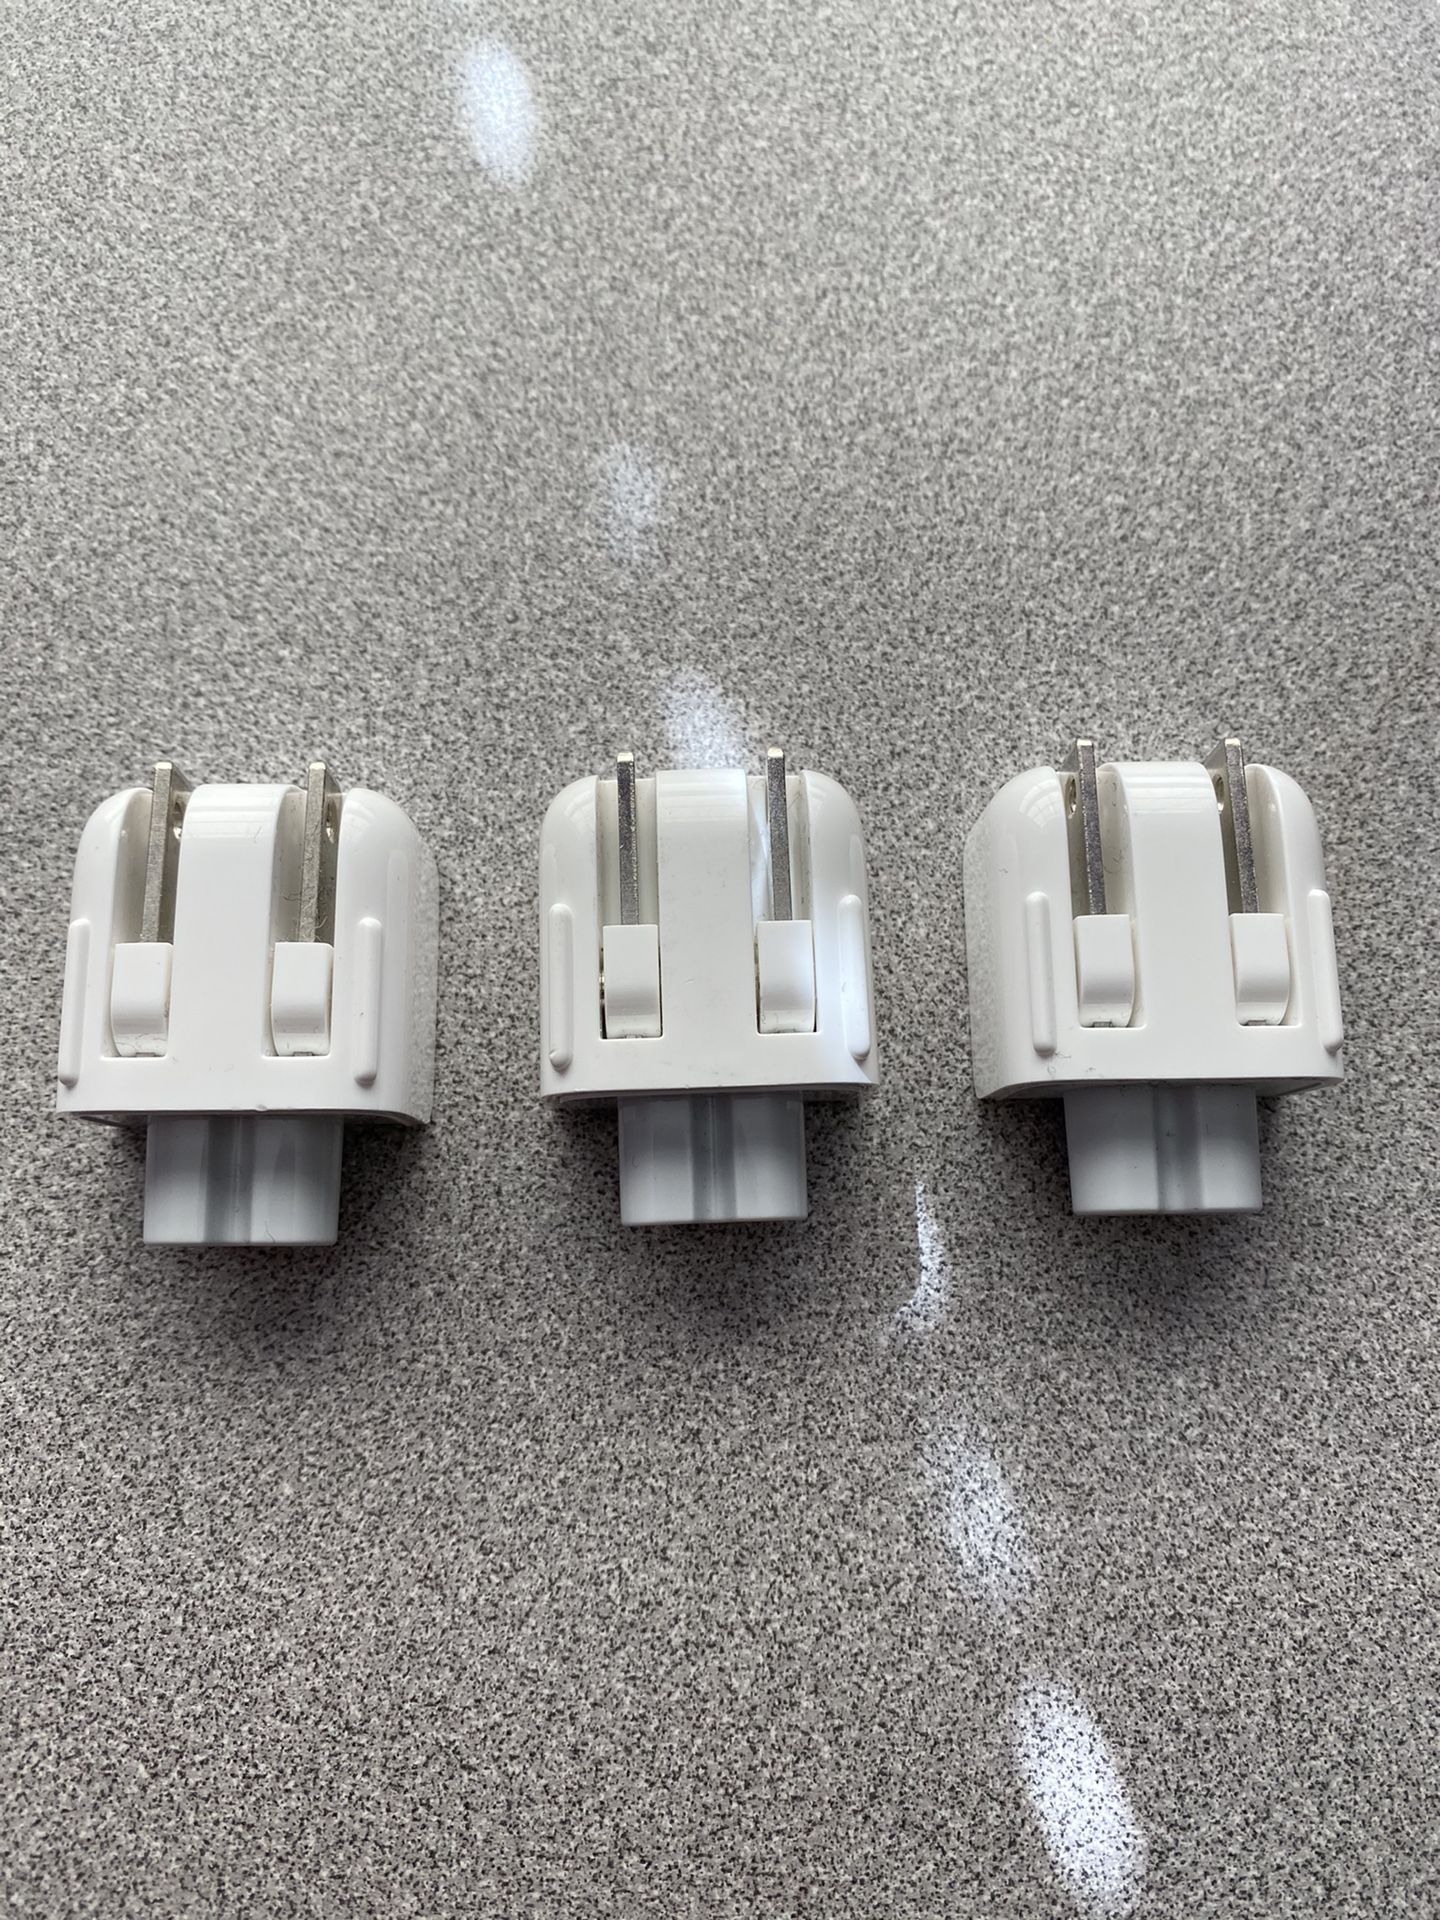 3x original Apple duck head charging adapter for MacBook iPad iPhone compatible chargers perfect!